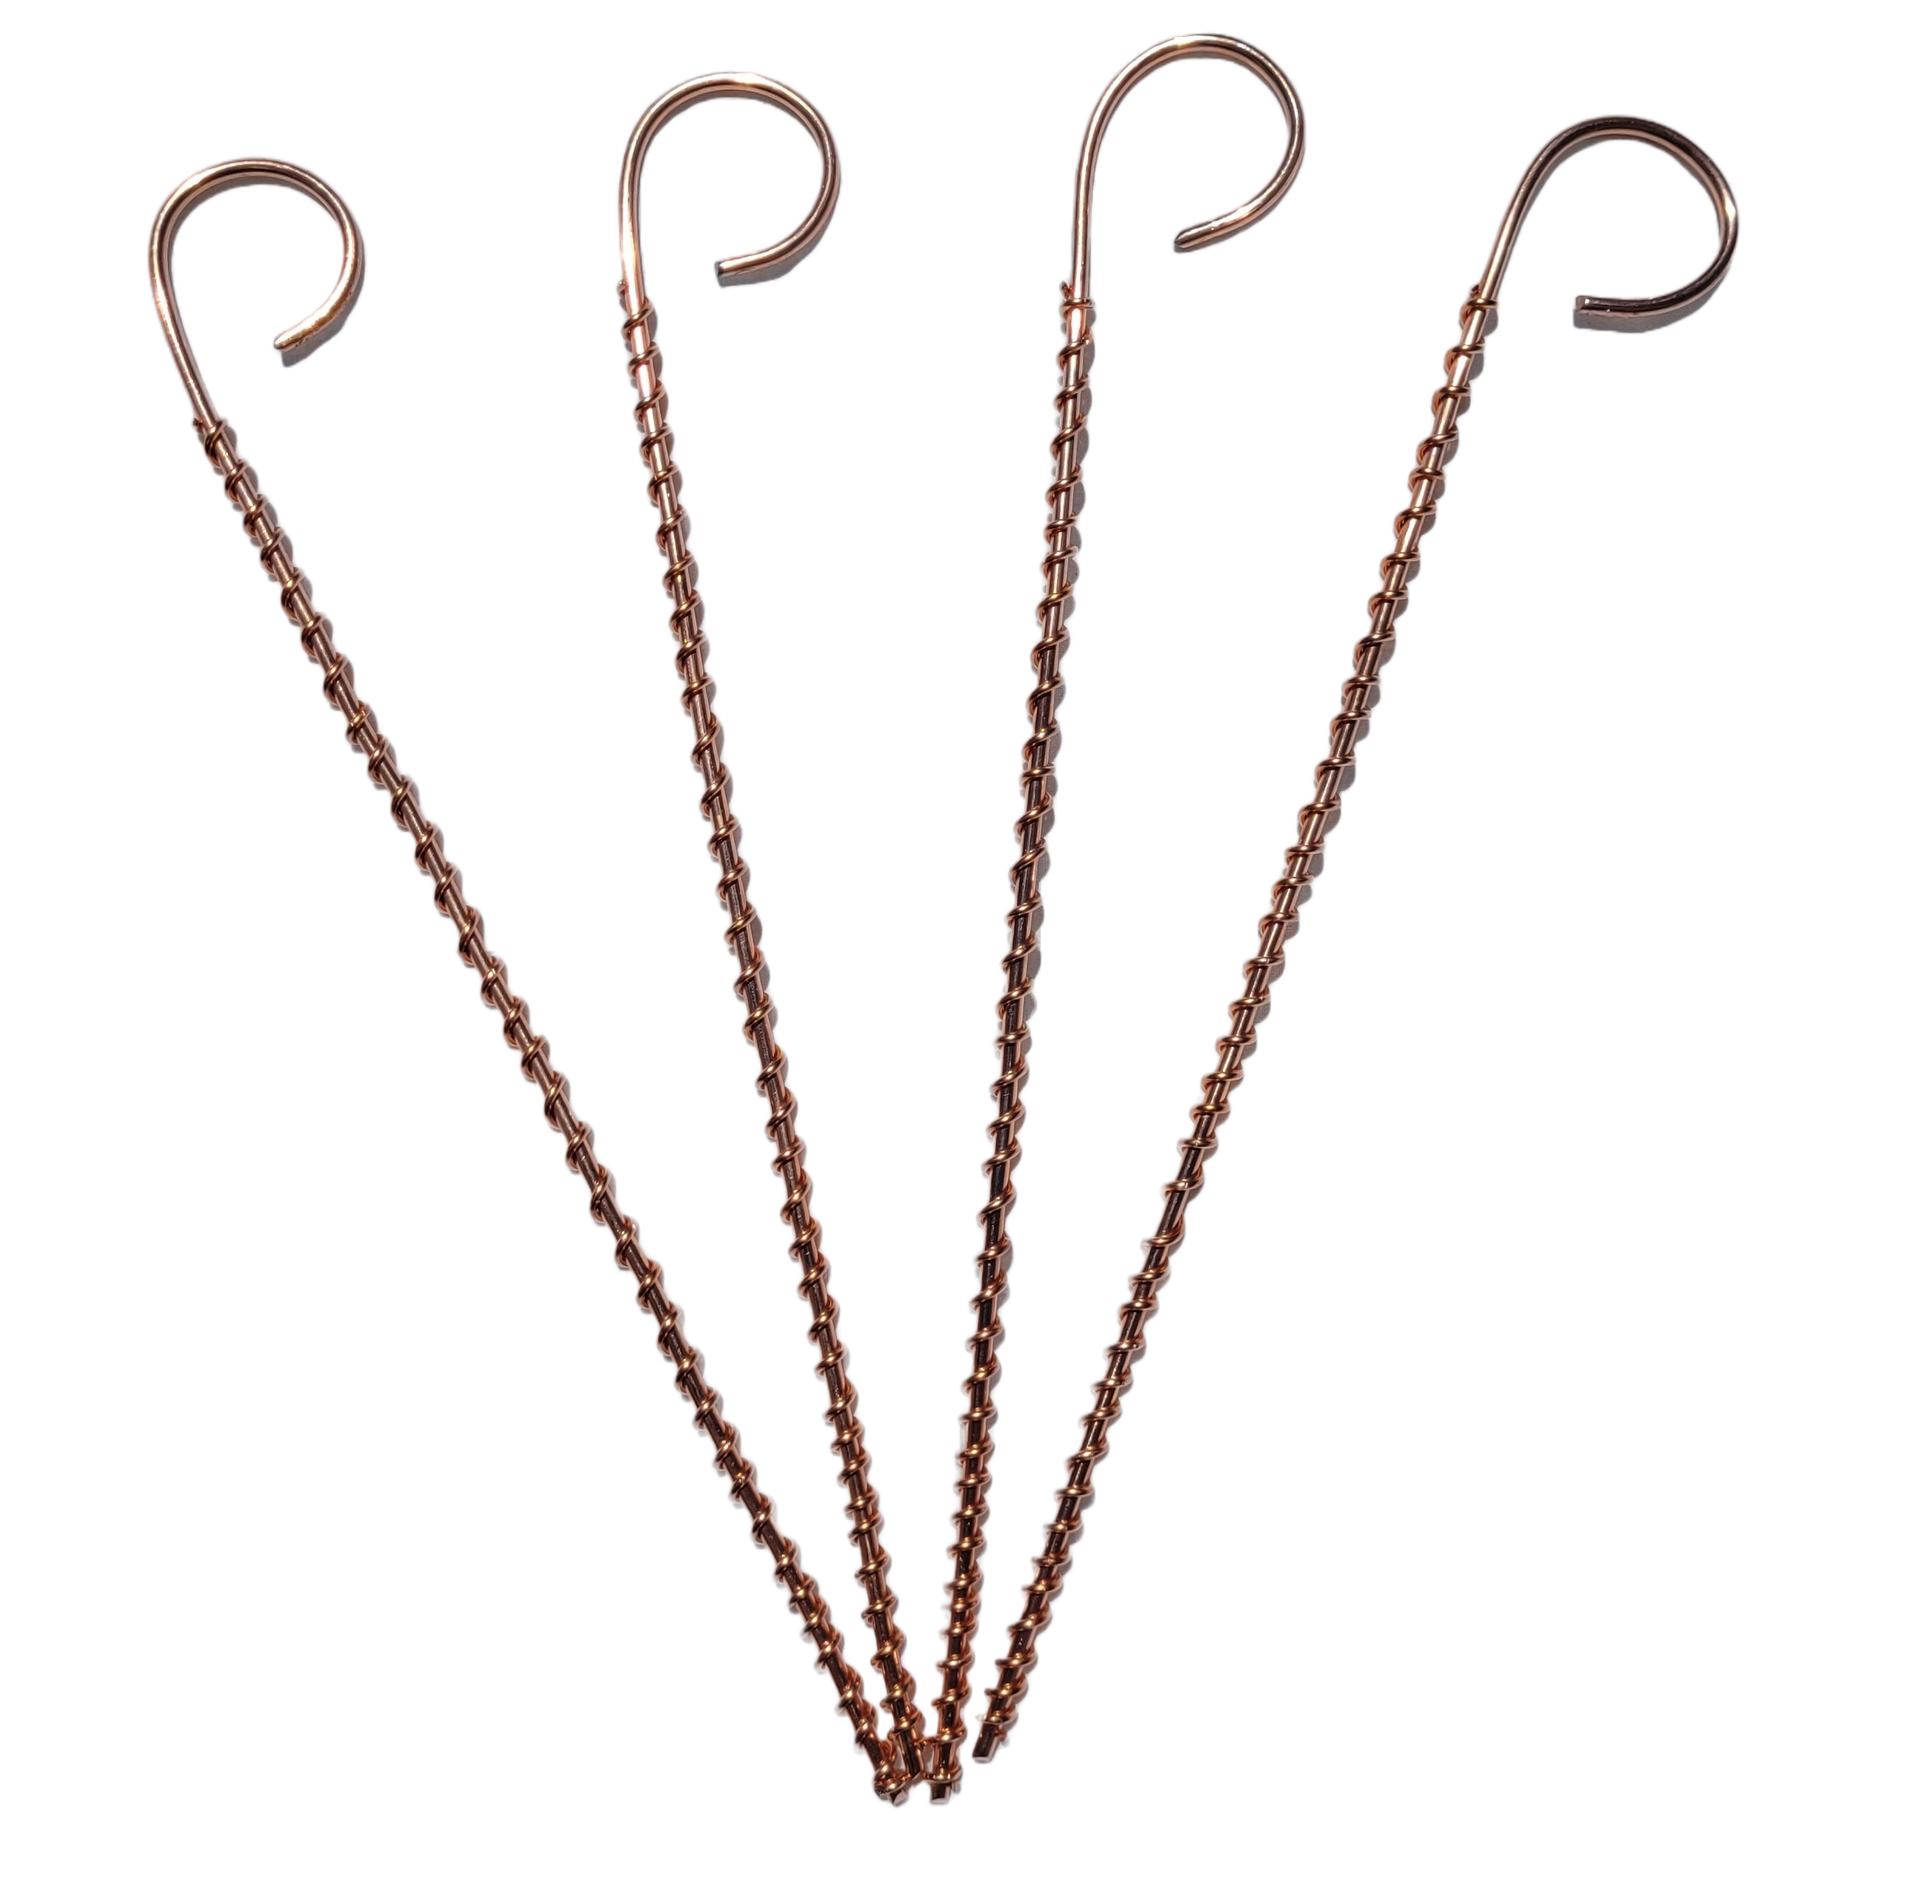 Crystal plant stakes now available! Wrapped with copper wire to help p